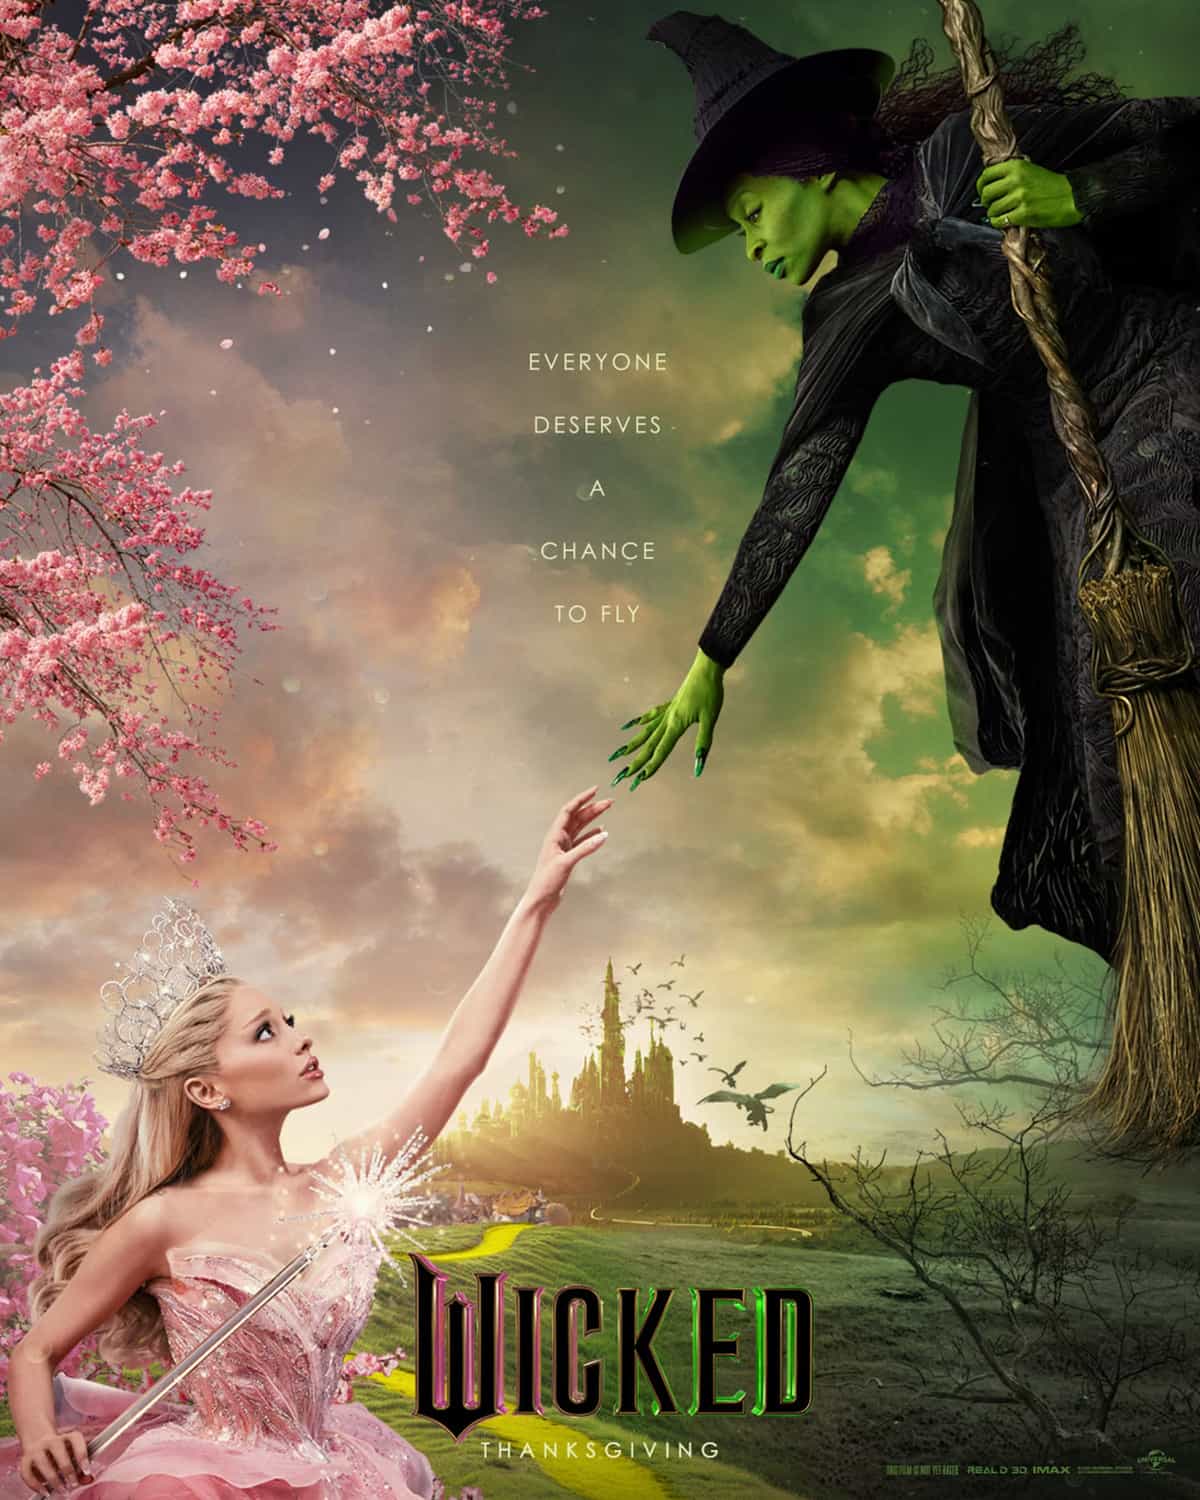 New poster has been released for Wicked which stars Cynthia Erivo and Ariana Grande - movie UK release date 24th November 2024 #wicked